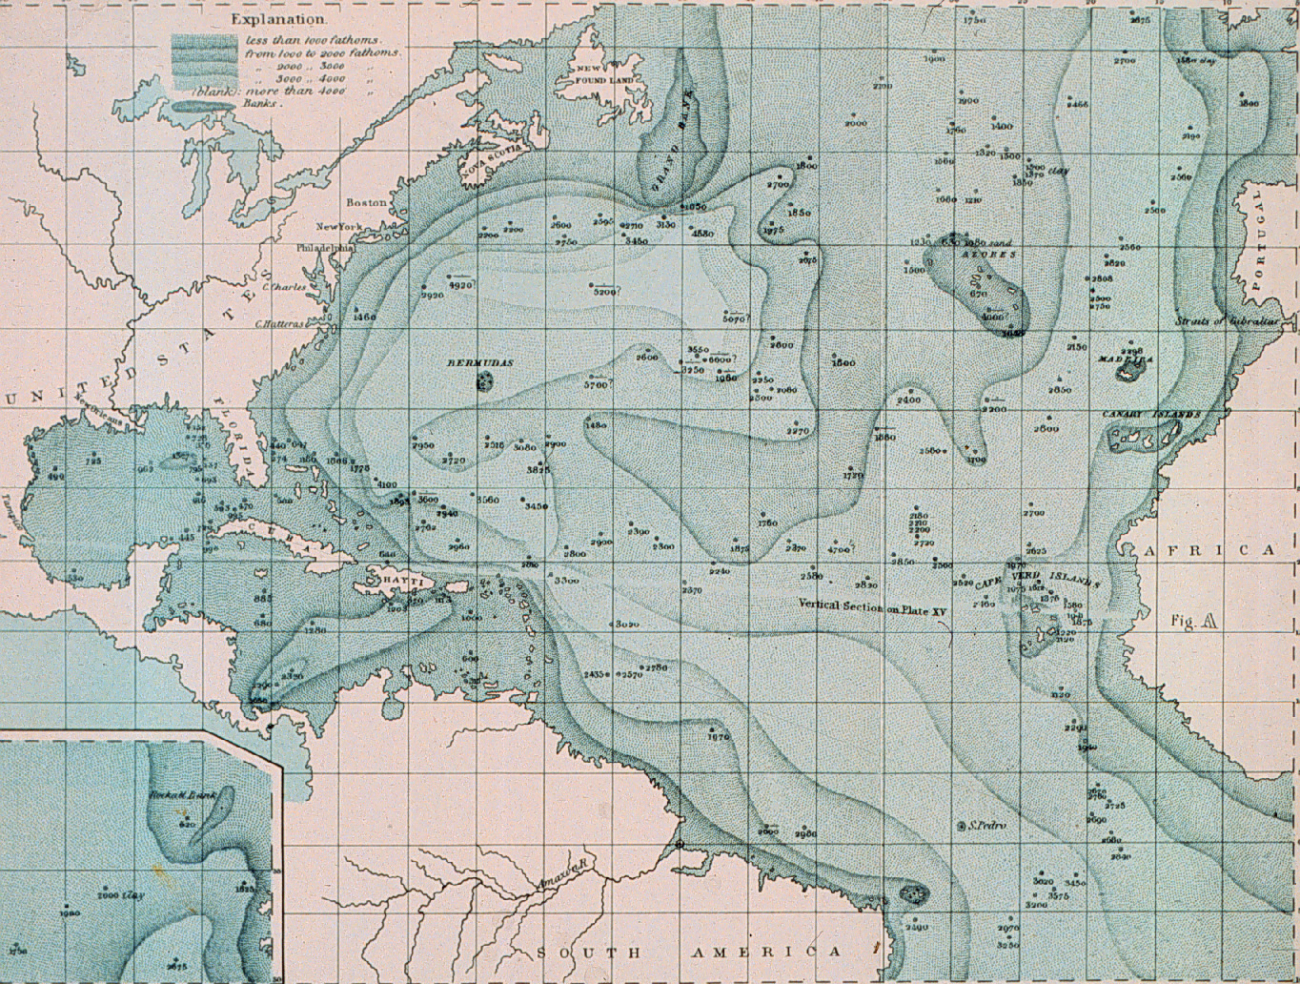 A second attempt at a  bathymetric map by Matthew Fontaine Maury